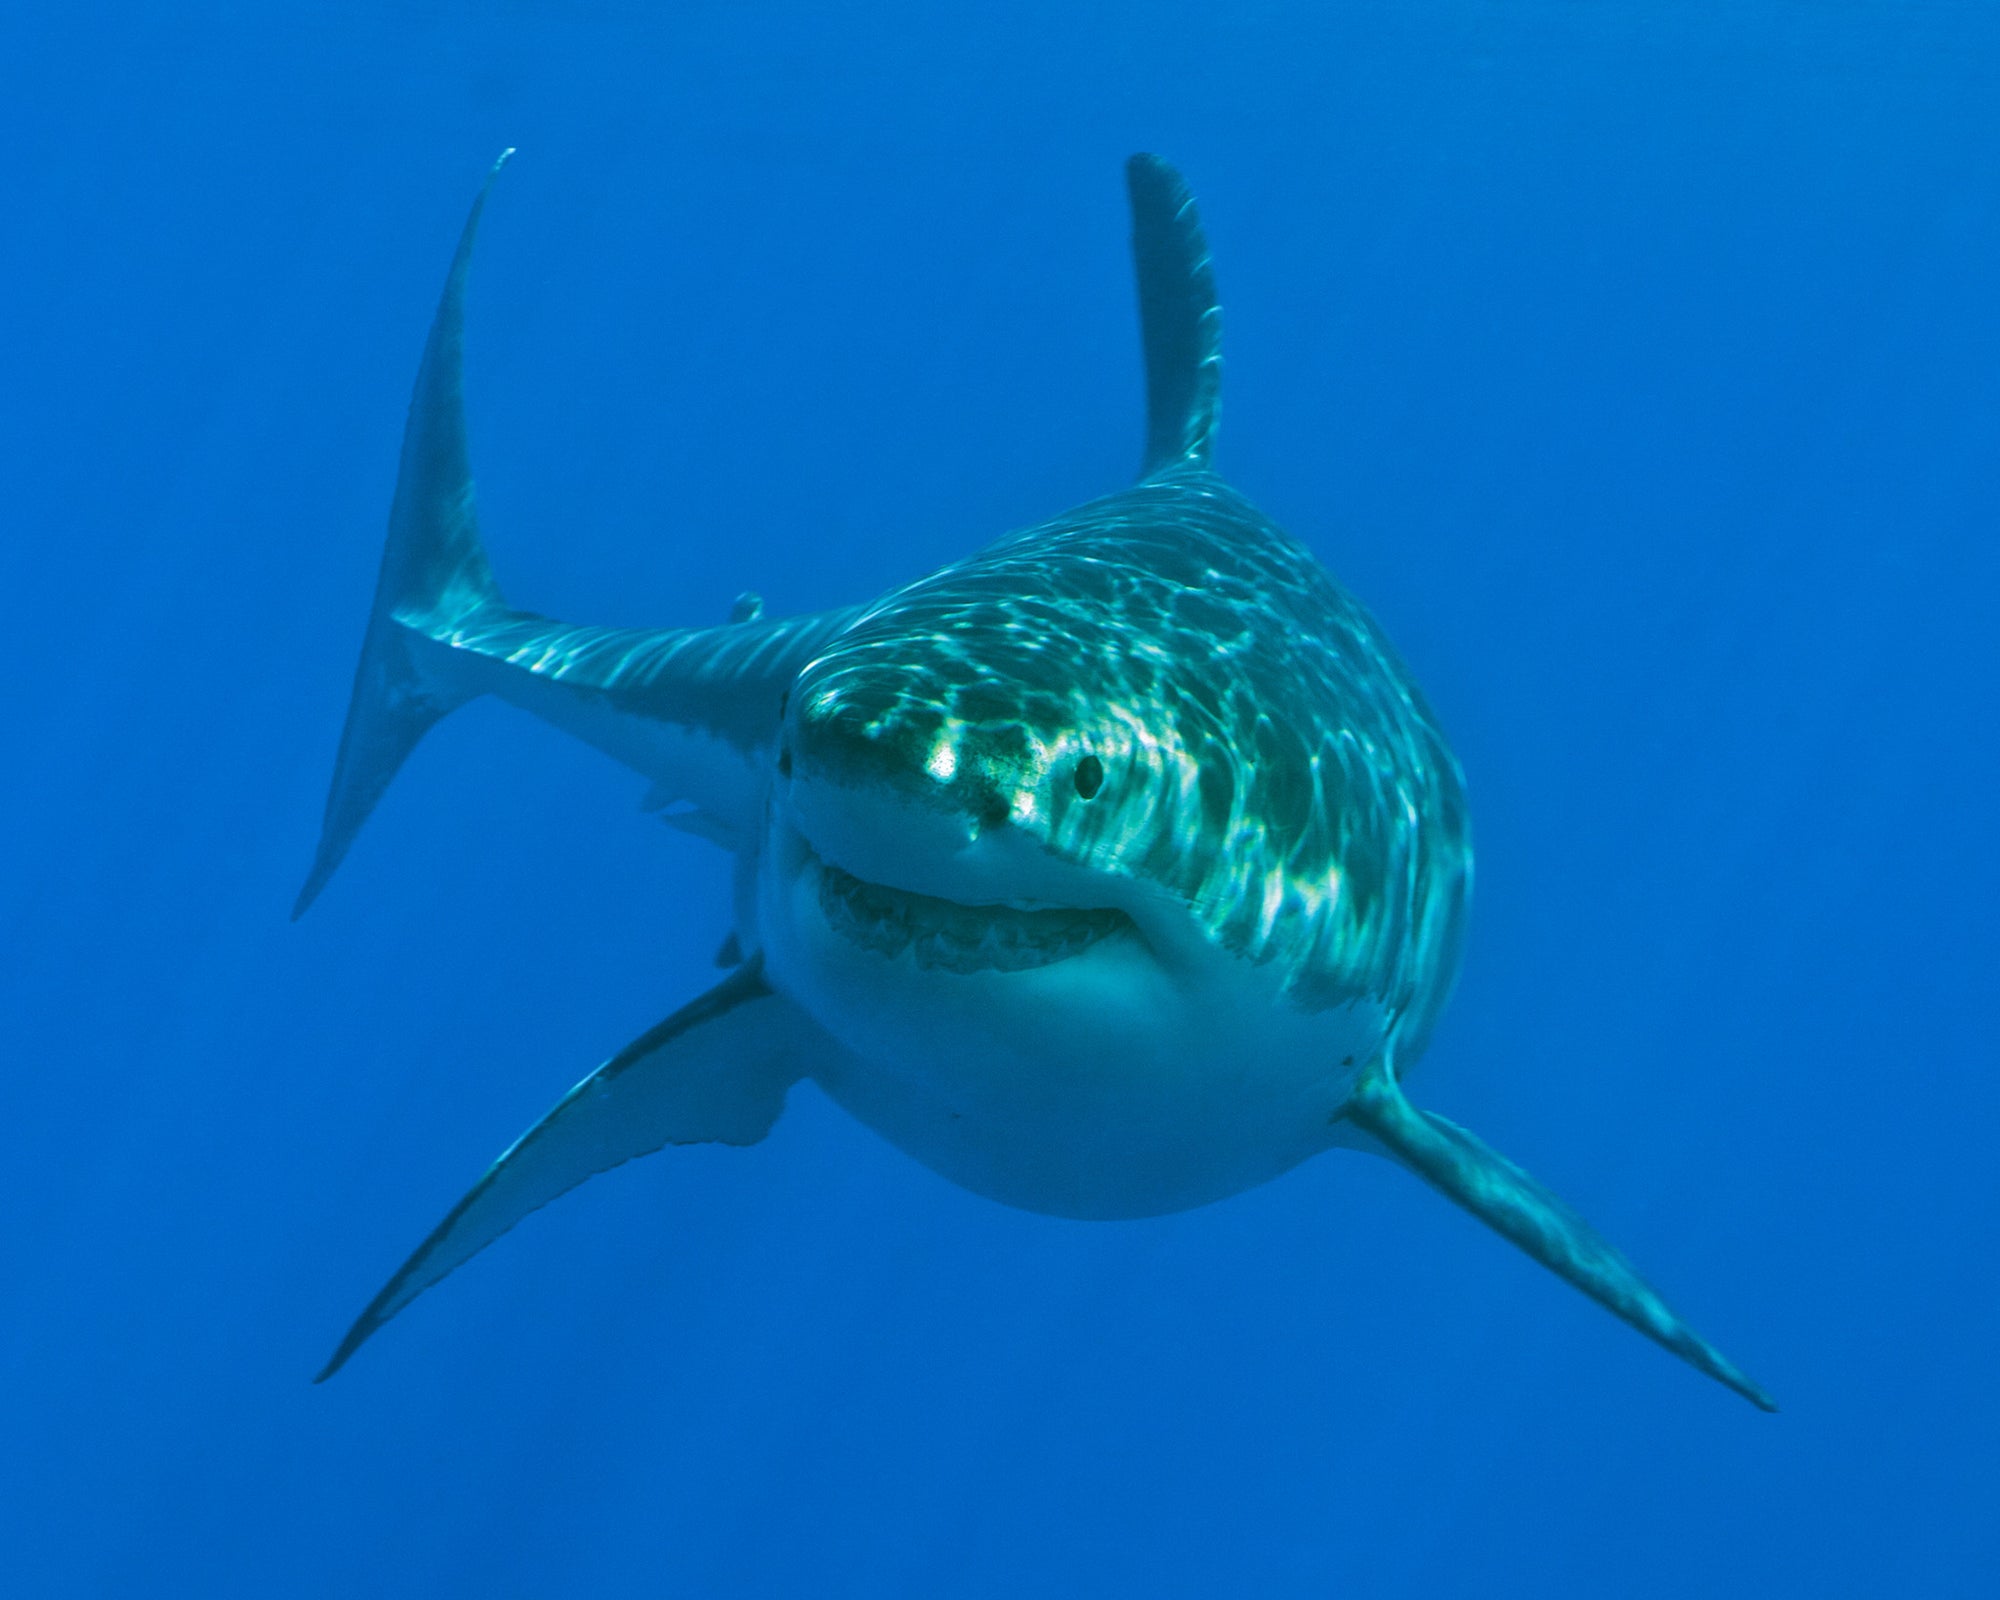 An underwater image of a Great White Shark swimming towards the camera taken at Guadalupe Island off of Mexico.